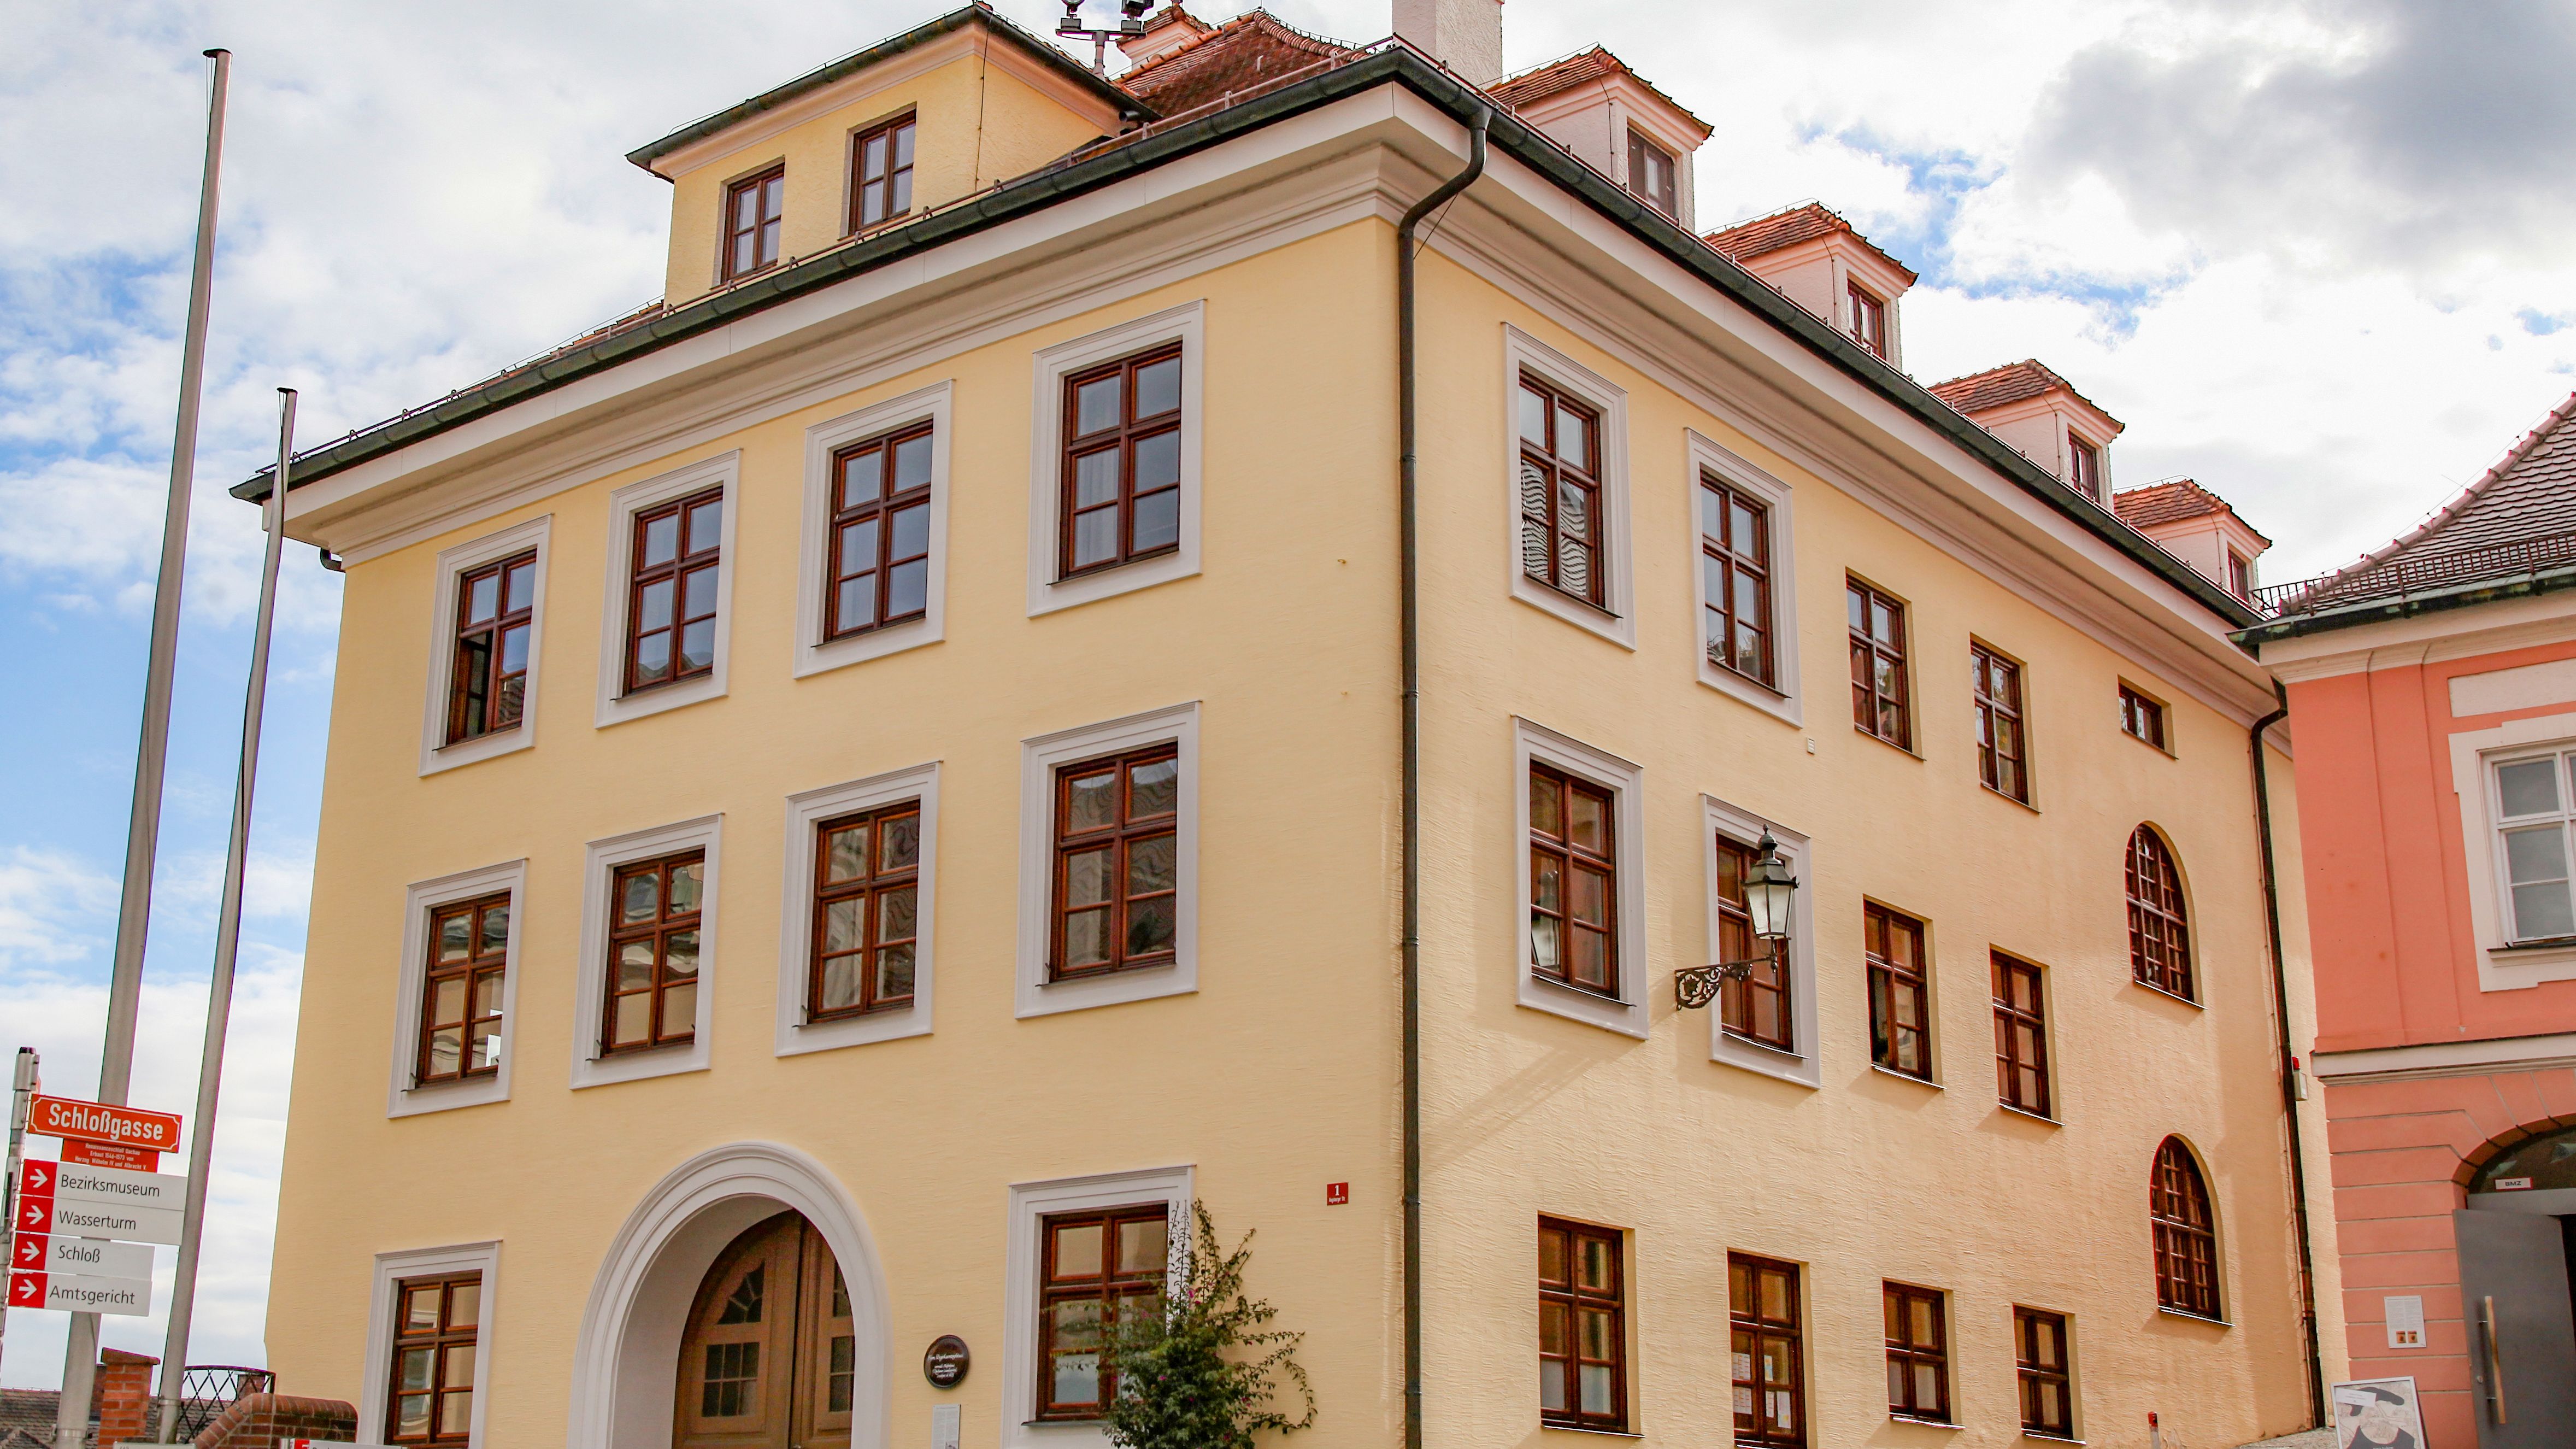 Photo of town hall building 2 in Dachau's historic old town. Photo: City of Dachau